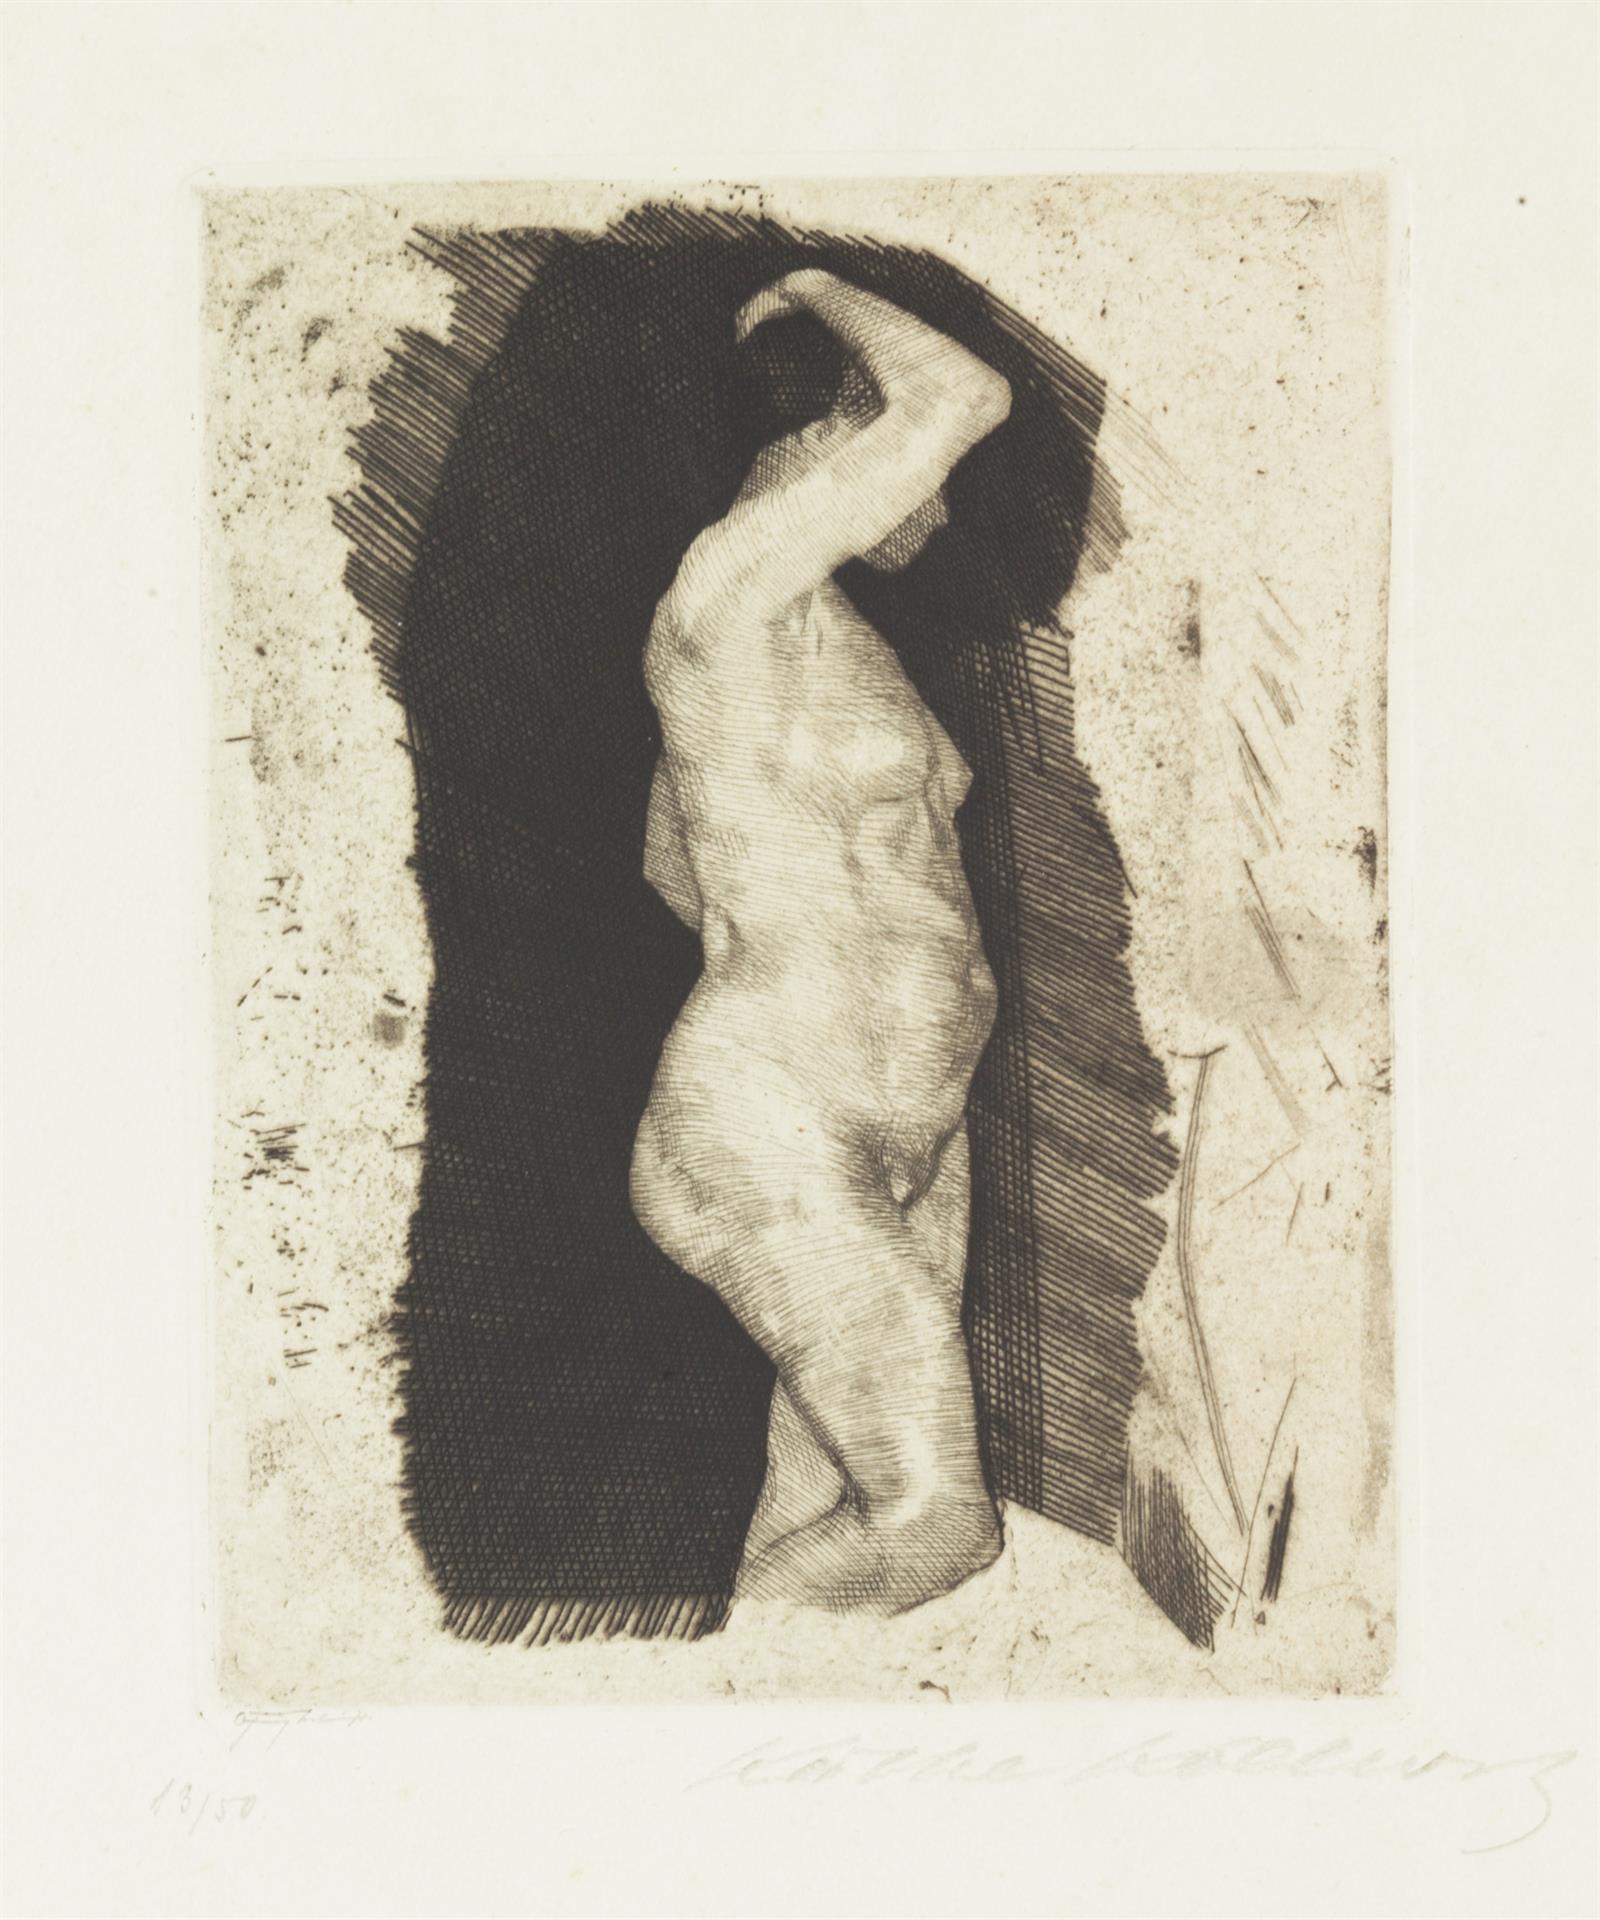 Käthe Kollwitz, Standing Female Nude, 1900, line etching and drypoint on copperplate paper, Kn 50 II c, Cologne Kollwitz Collection © Käthe Kollwitz Museum Köln